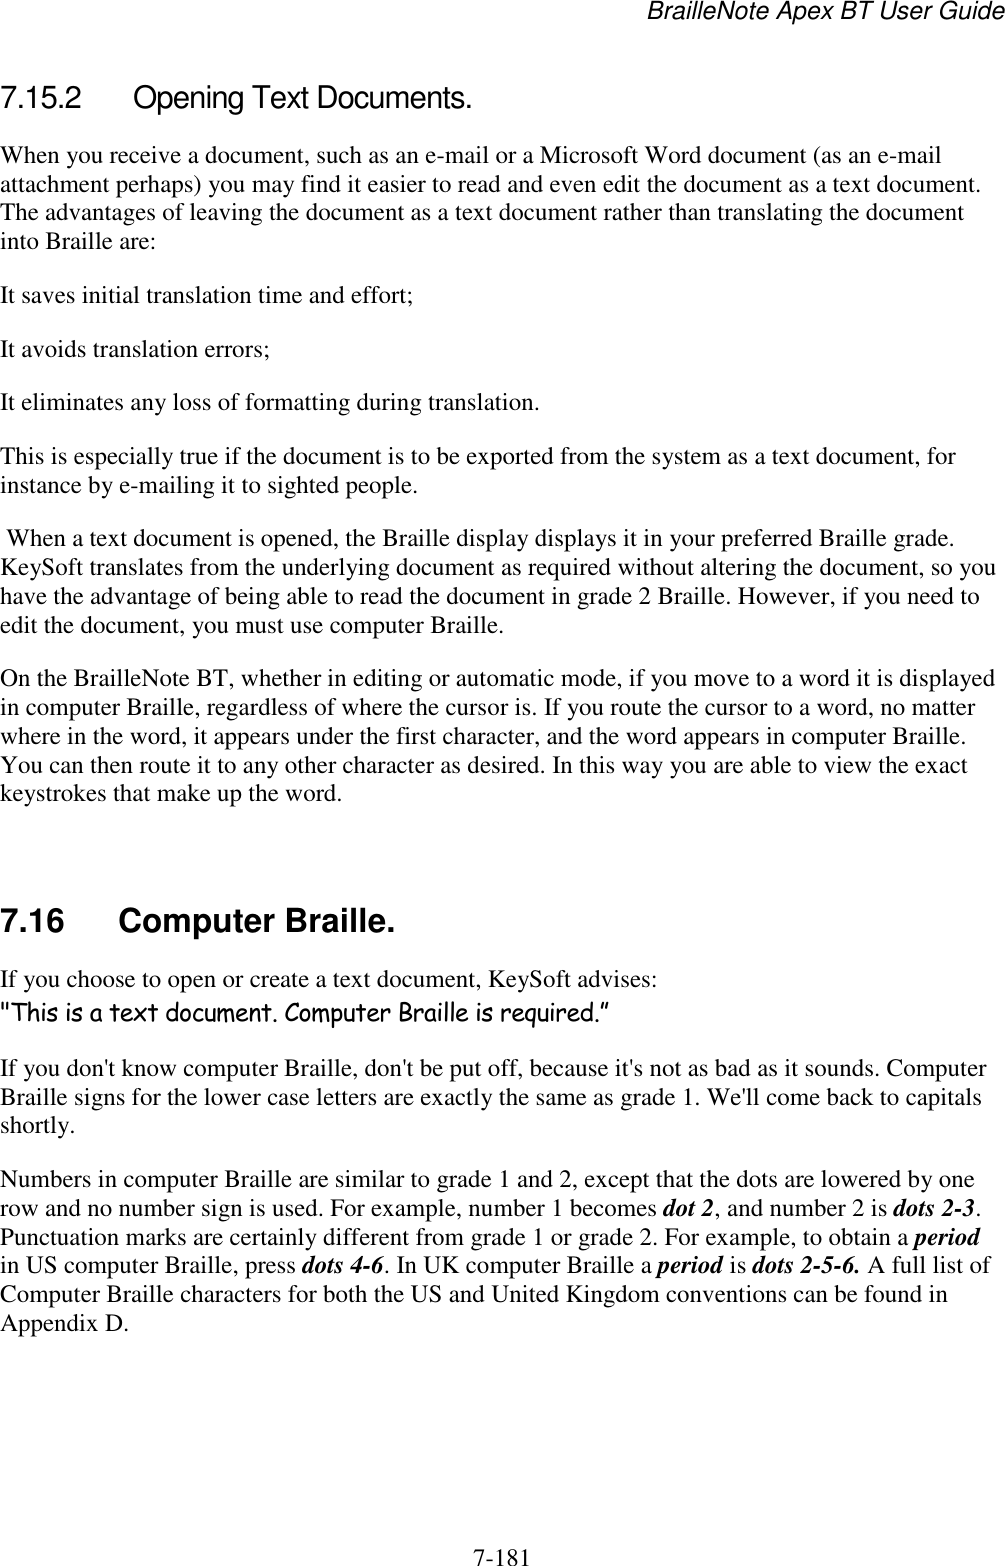 BrailleNote Apex BT User Guide   7-181   7.15.2  Opening Text Documents. When you receive a document, such as an e-mail or a Microsoft Word document (as an e-mail attachment perhaps) you may find it easier to read and even edit the document as a text document. The advantages of leaving the document as a text document rather than translating the document into Braille are: It saves initial translation time and effort; It avoids translation errors; It eliminates any loss of formatting during translation. This is especially true if the document is to be exported from the system as a text document, for instance by e-mailing it to sighted people.  When a text document is opened, the Braille display displays it in your preferred Braille grade. KeySoft translates from the underlying document as required without altering the document, so you have the advantage of being able to read the document in grade 2 Braille. However, if you need to edit the document, you must use computer Braille. On the BrailleNote BT, whether in editing or automatic mode, if you move to a word it is displayed in computer Braille, regardless of where the cursor is. If you route the cursor to a word, no matter where in the word, it appears under the first character, and the word appears in computer Braille. You can then route it to any other character as desired. In this way you are able to view the exact keystrokes that make up the word.   7.16  Computer Braille. If you choose to open or create a text document, KeySoft advises: &quot;This is a text document. Computer Braille is required.” If you don&apos;t know computer Braille, don&apos;t be put off, because it&apos;s not as bad as it sounds. Computer Braille signs for the lower case letters are exactly the same as grade 1. We&apos;ll come back to capitals shortly. Numbers in computer Braille are similar to grade 1 and 2, except that the dots are lowered by one row and no number sign is used. For example, number 1 becomes dot 2, and number 2 is dots 2-3. Punctuation marks are certainly different from grade 1 or grade 2. For example, to obtain a period in US computer Braille, press dots 4-6. In UK computer Braille a period is dots 2-5-6. A full list of Computer Braille characters for both the US and United Kingdom conventions can be found in Appendix D.   